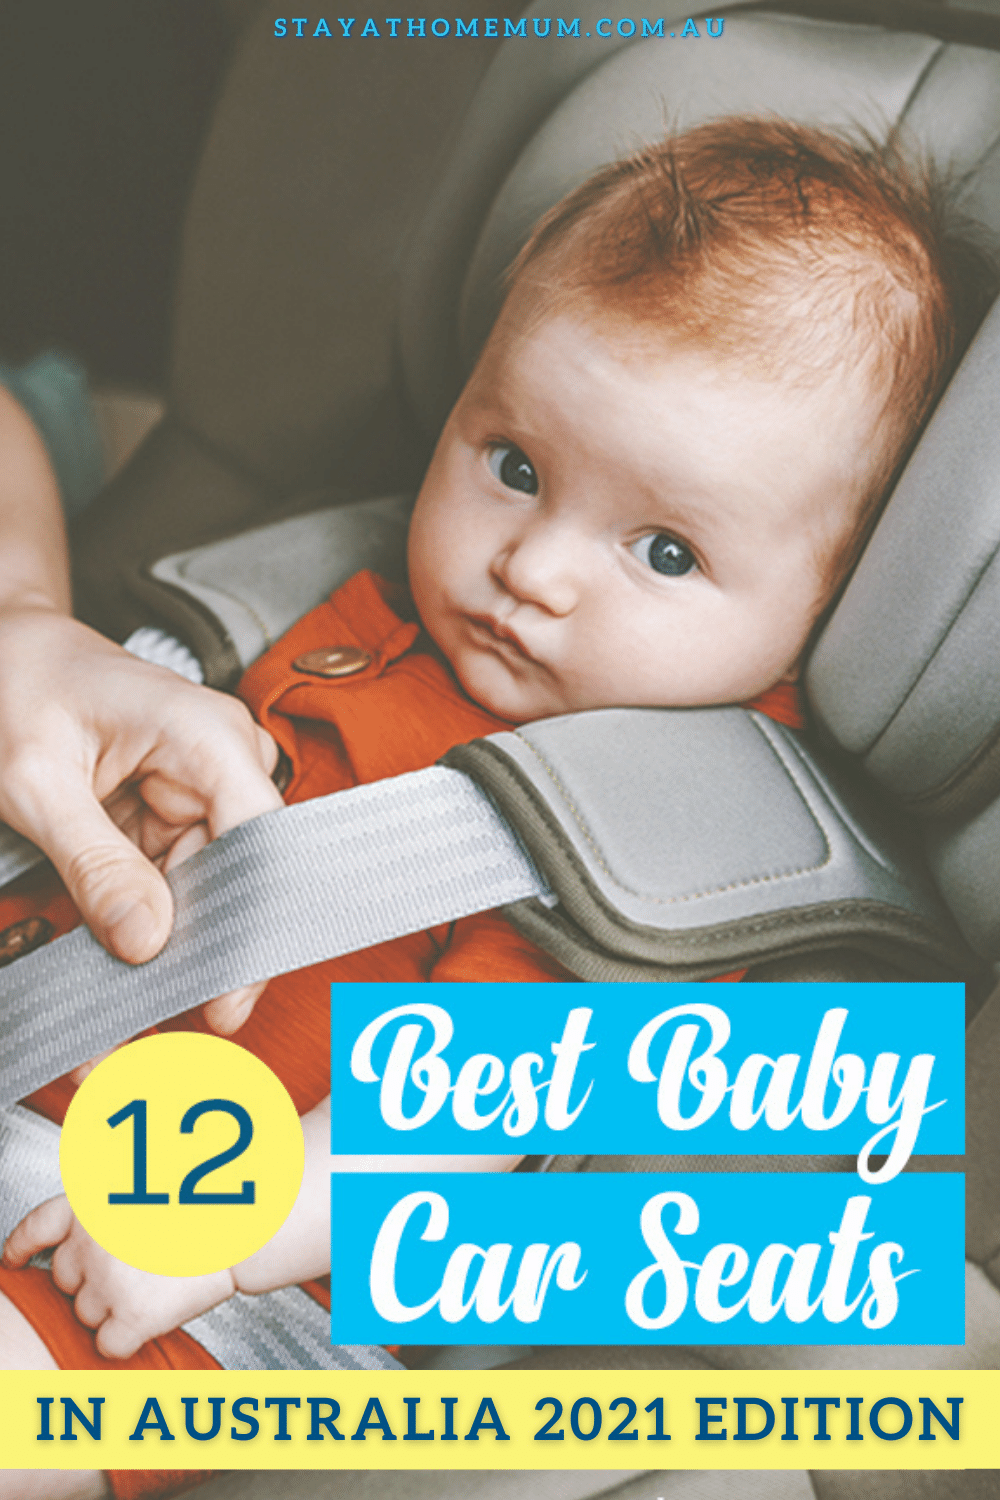 12 Best Baby Car Seats in Australia 2021 Edition | Stay At Home Mum